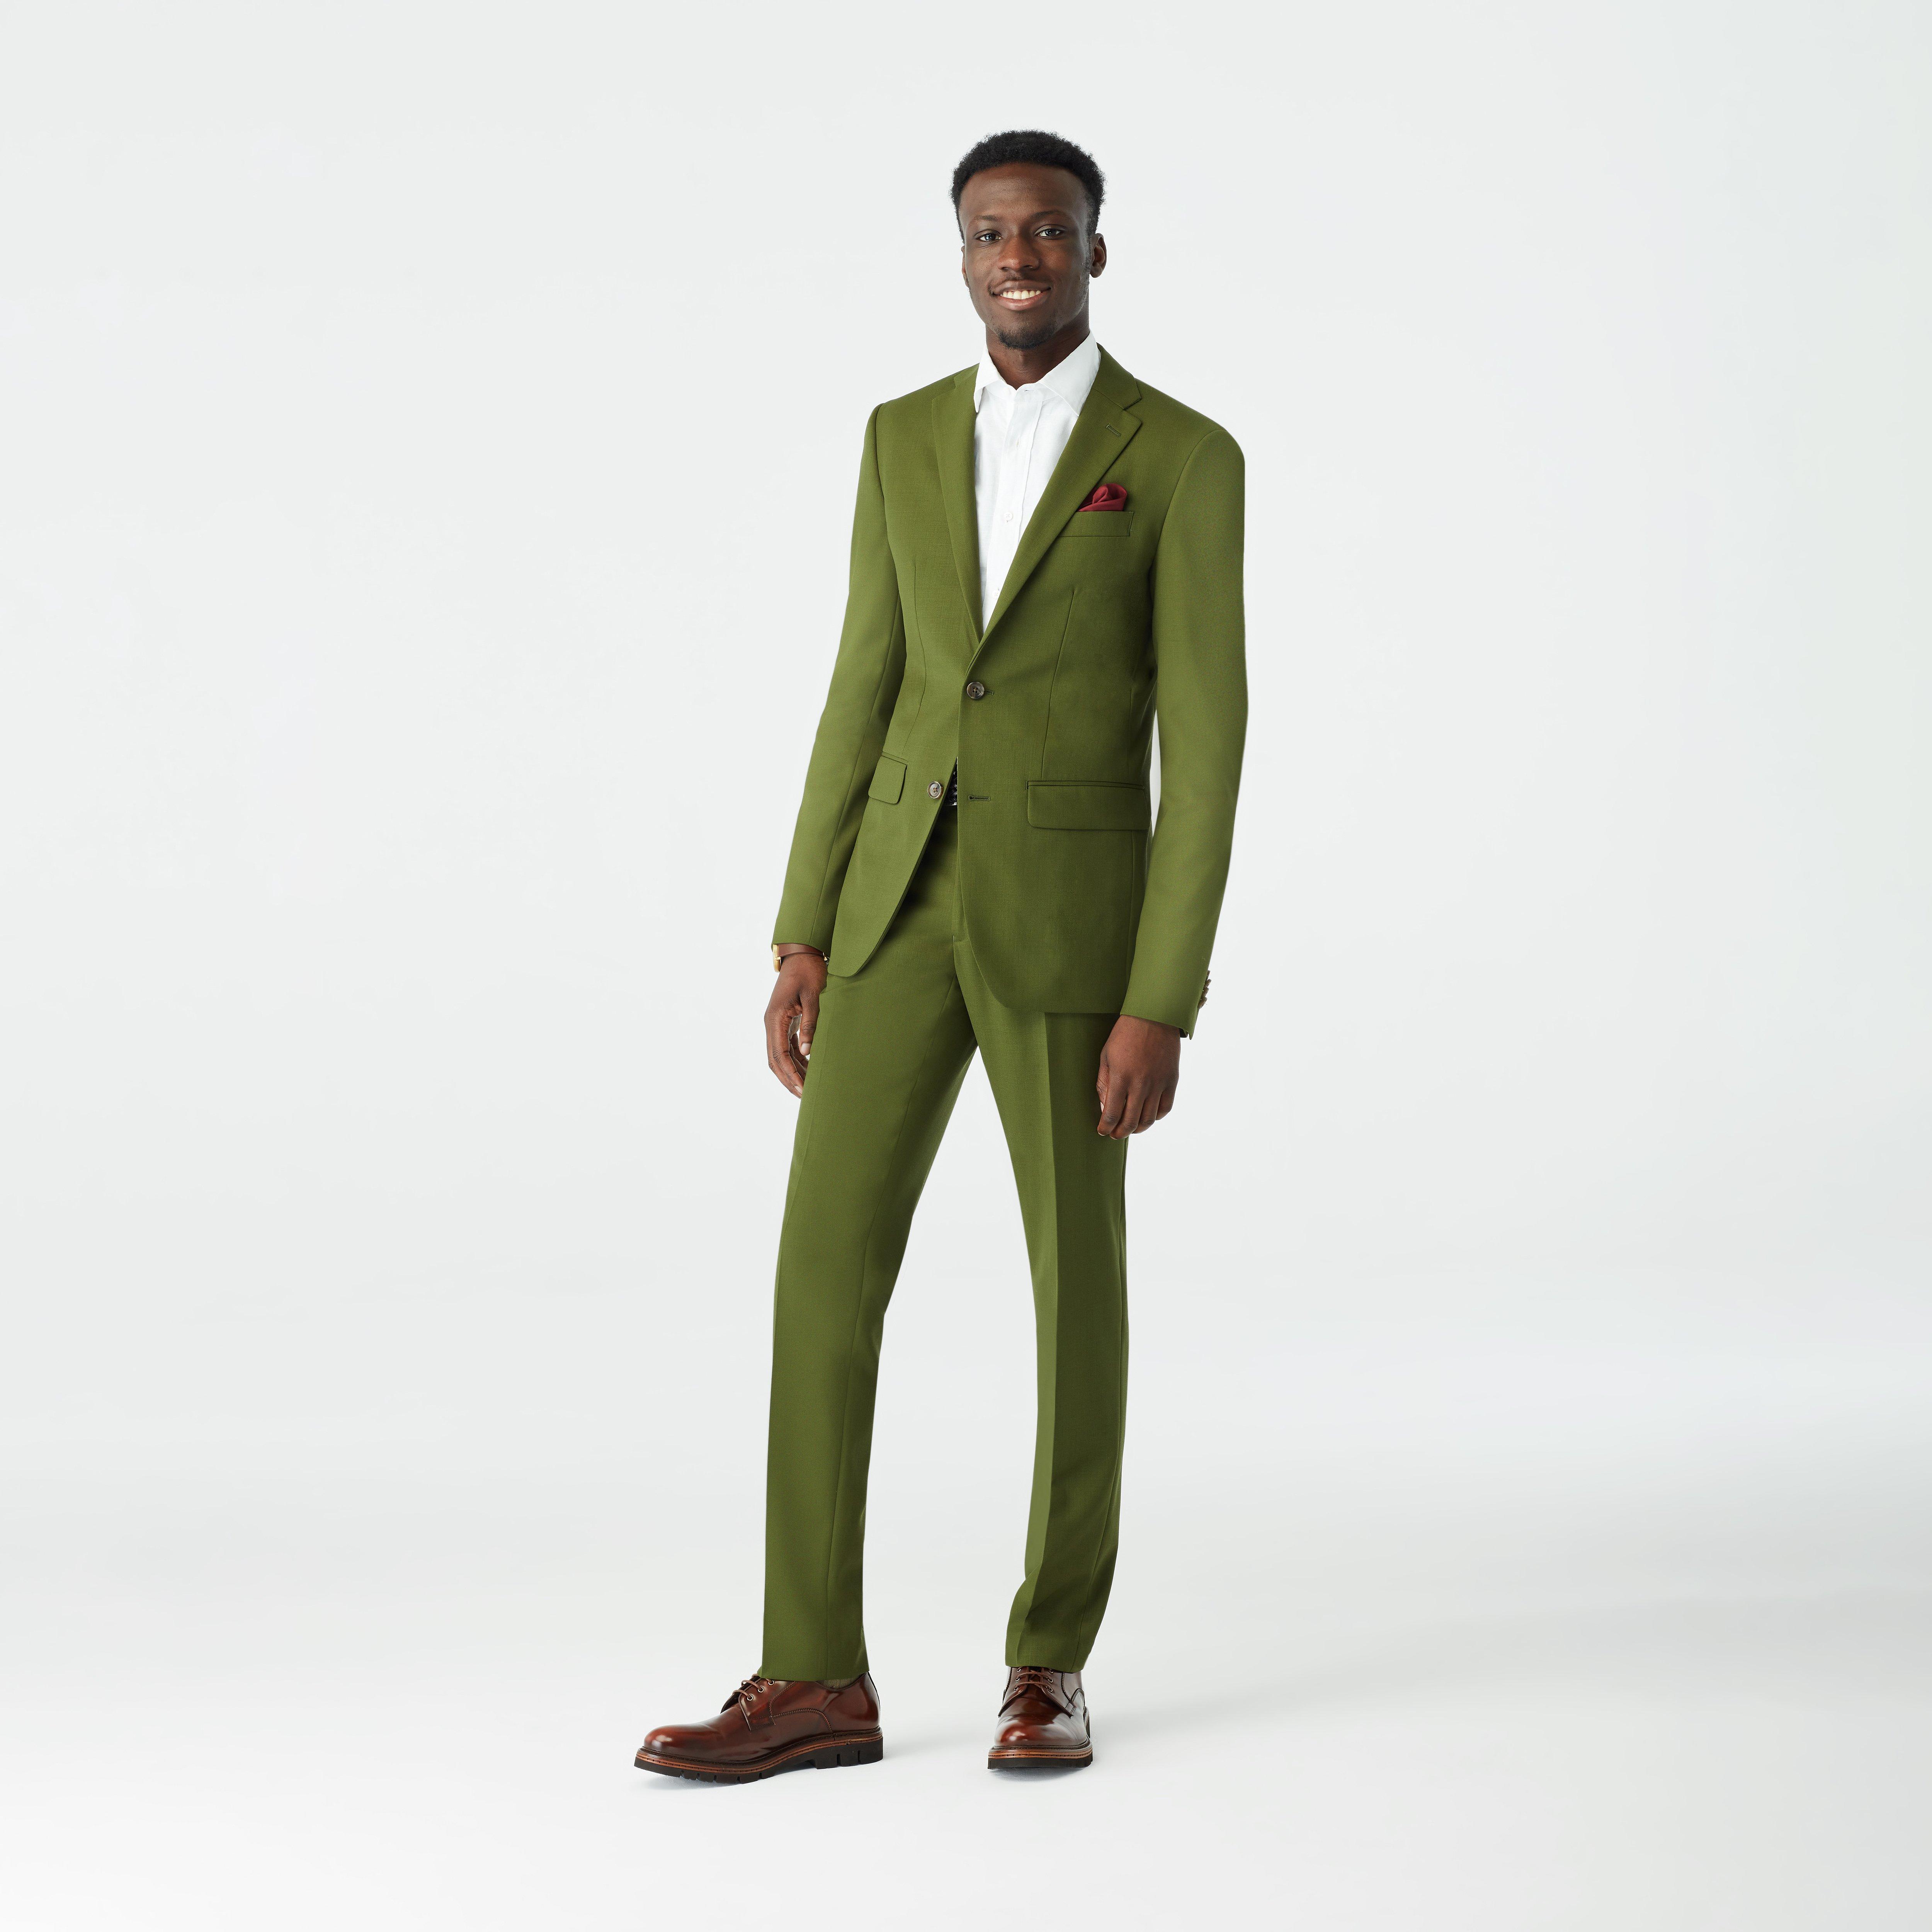 How to wear a suit casually | Tailor made suits, Green suit men, Green suit